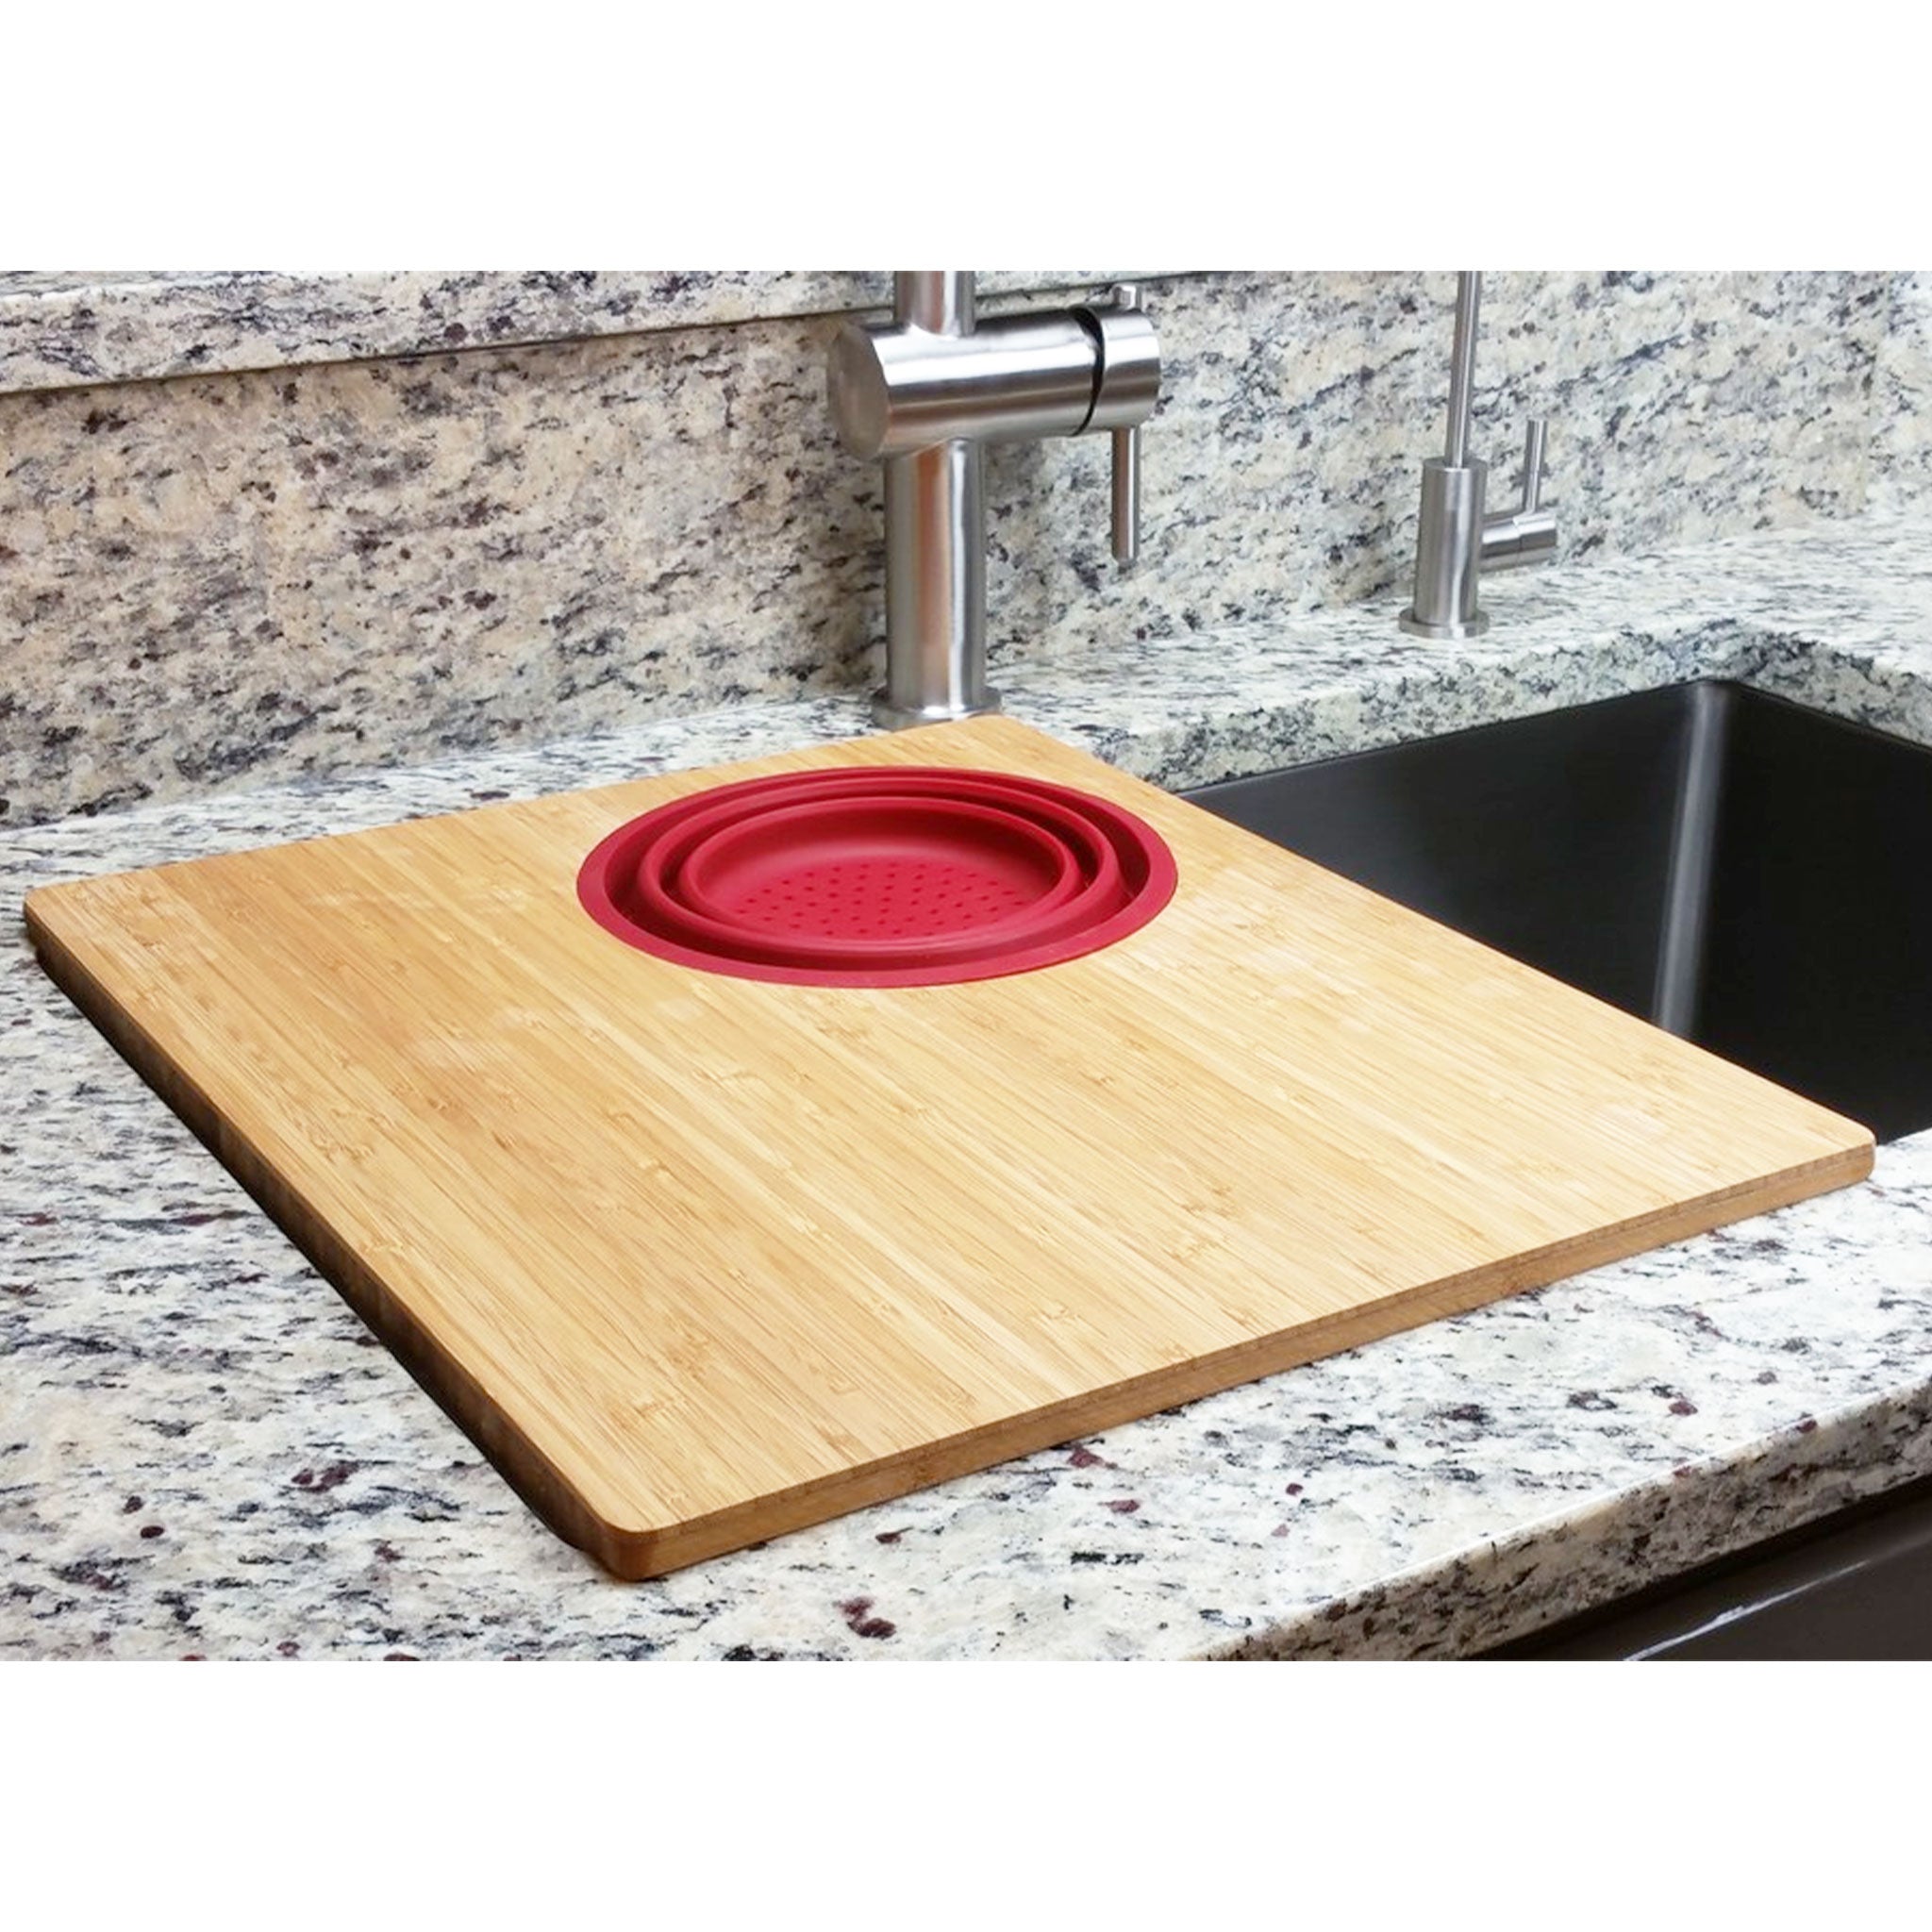 Products 18" Bamboo Cutting Board with Silicone Colander